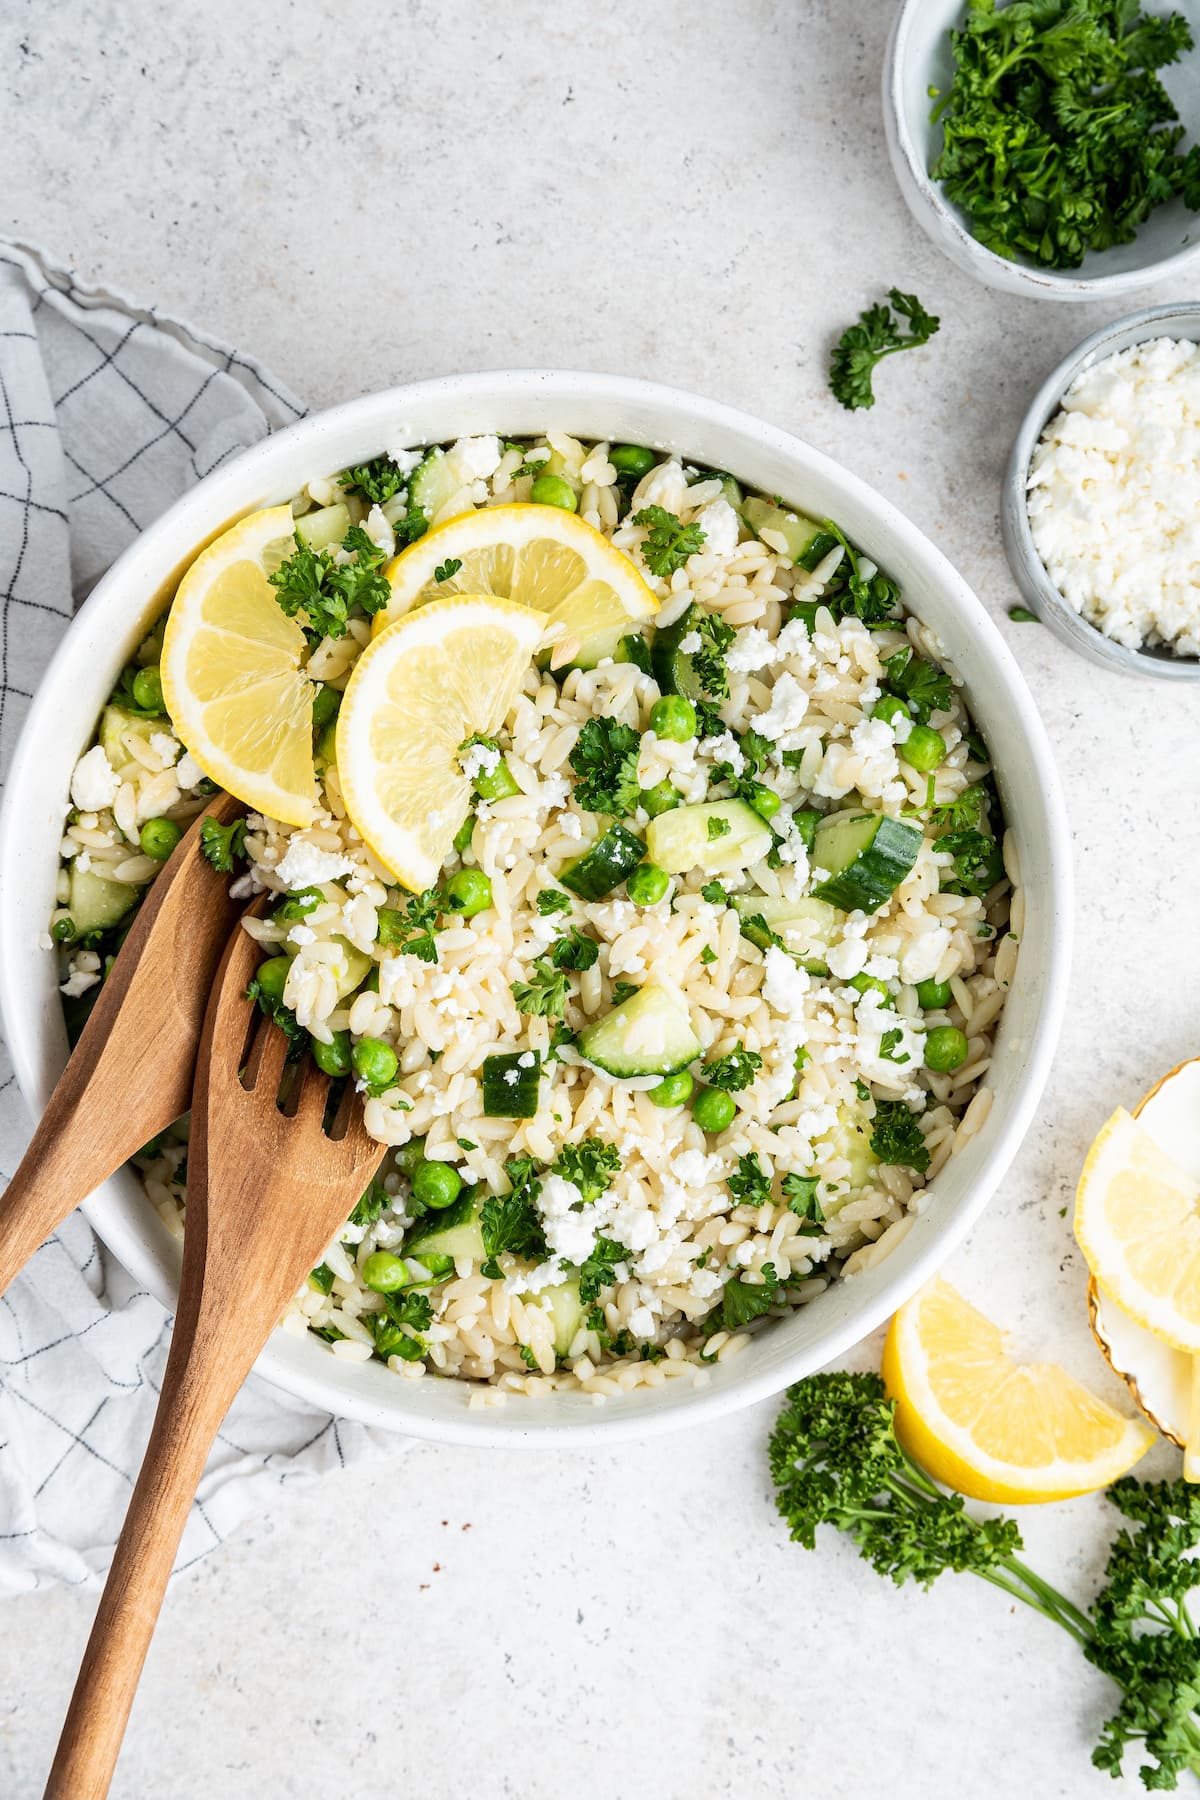 Lemon orzo salad with fresh lemon wedges in a white bowl with wooden serving spoons.